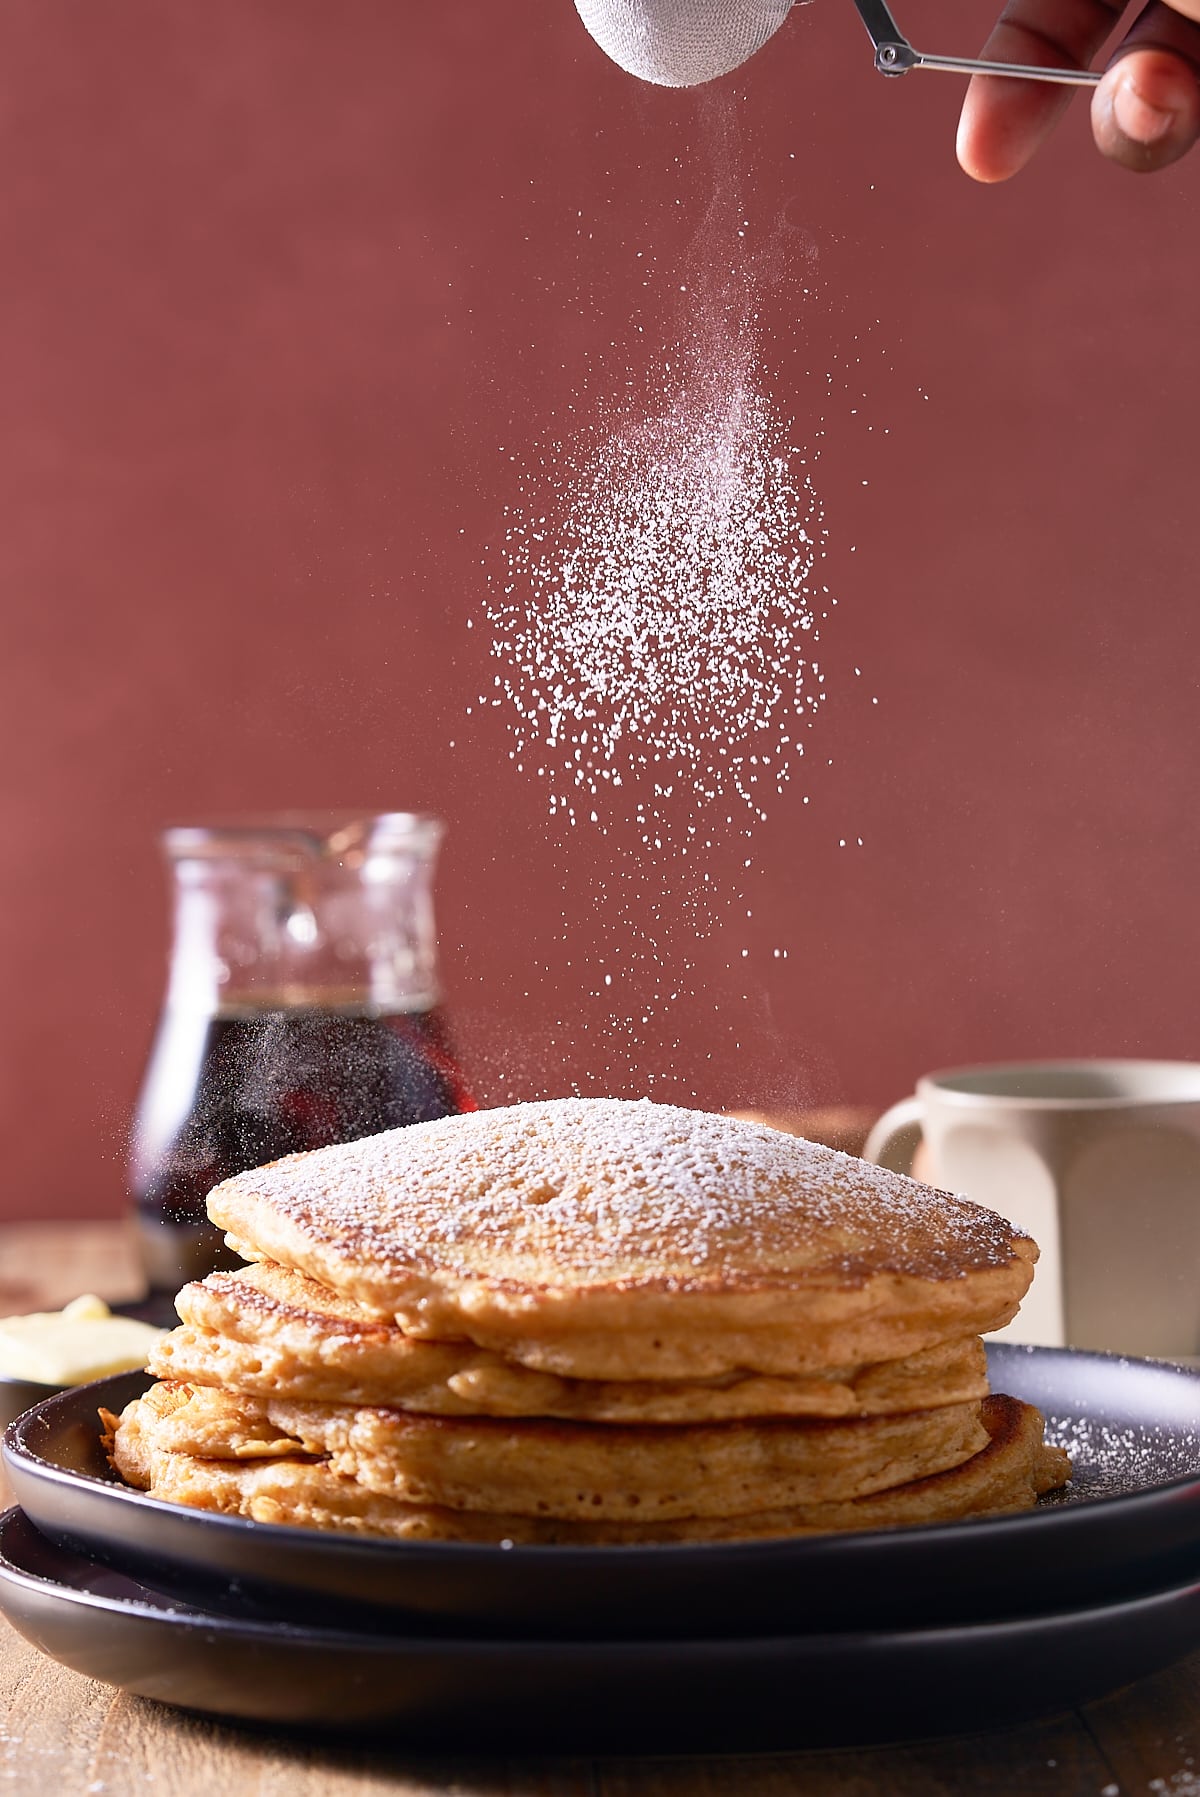 A stack of sweet potato pancakes on a black plate, being dusted with icing sugar, and with a jug of maple syrup served alongside.